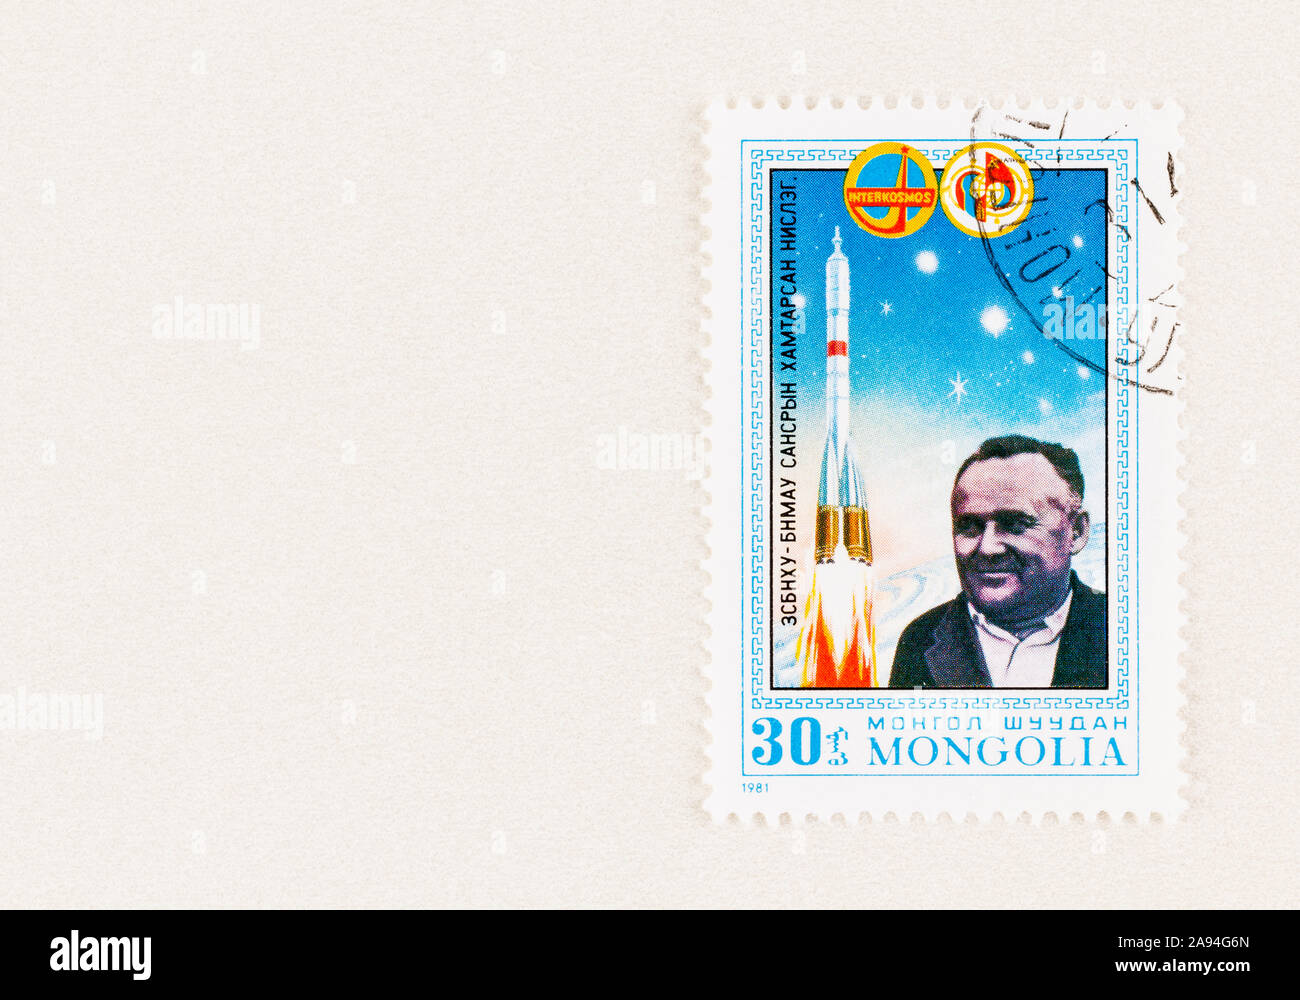 SEATTLE WASHINGTON - October 5, 2019: Mongol postage stamp featuring Koroljow, 'father' and leader of the Soviet program for many years. Stock Photo